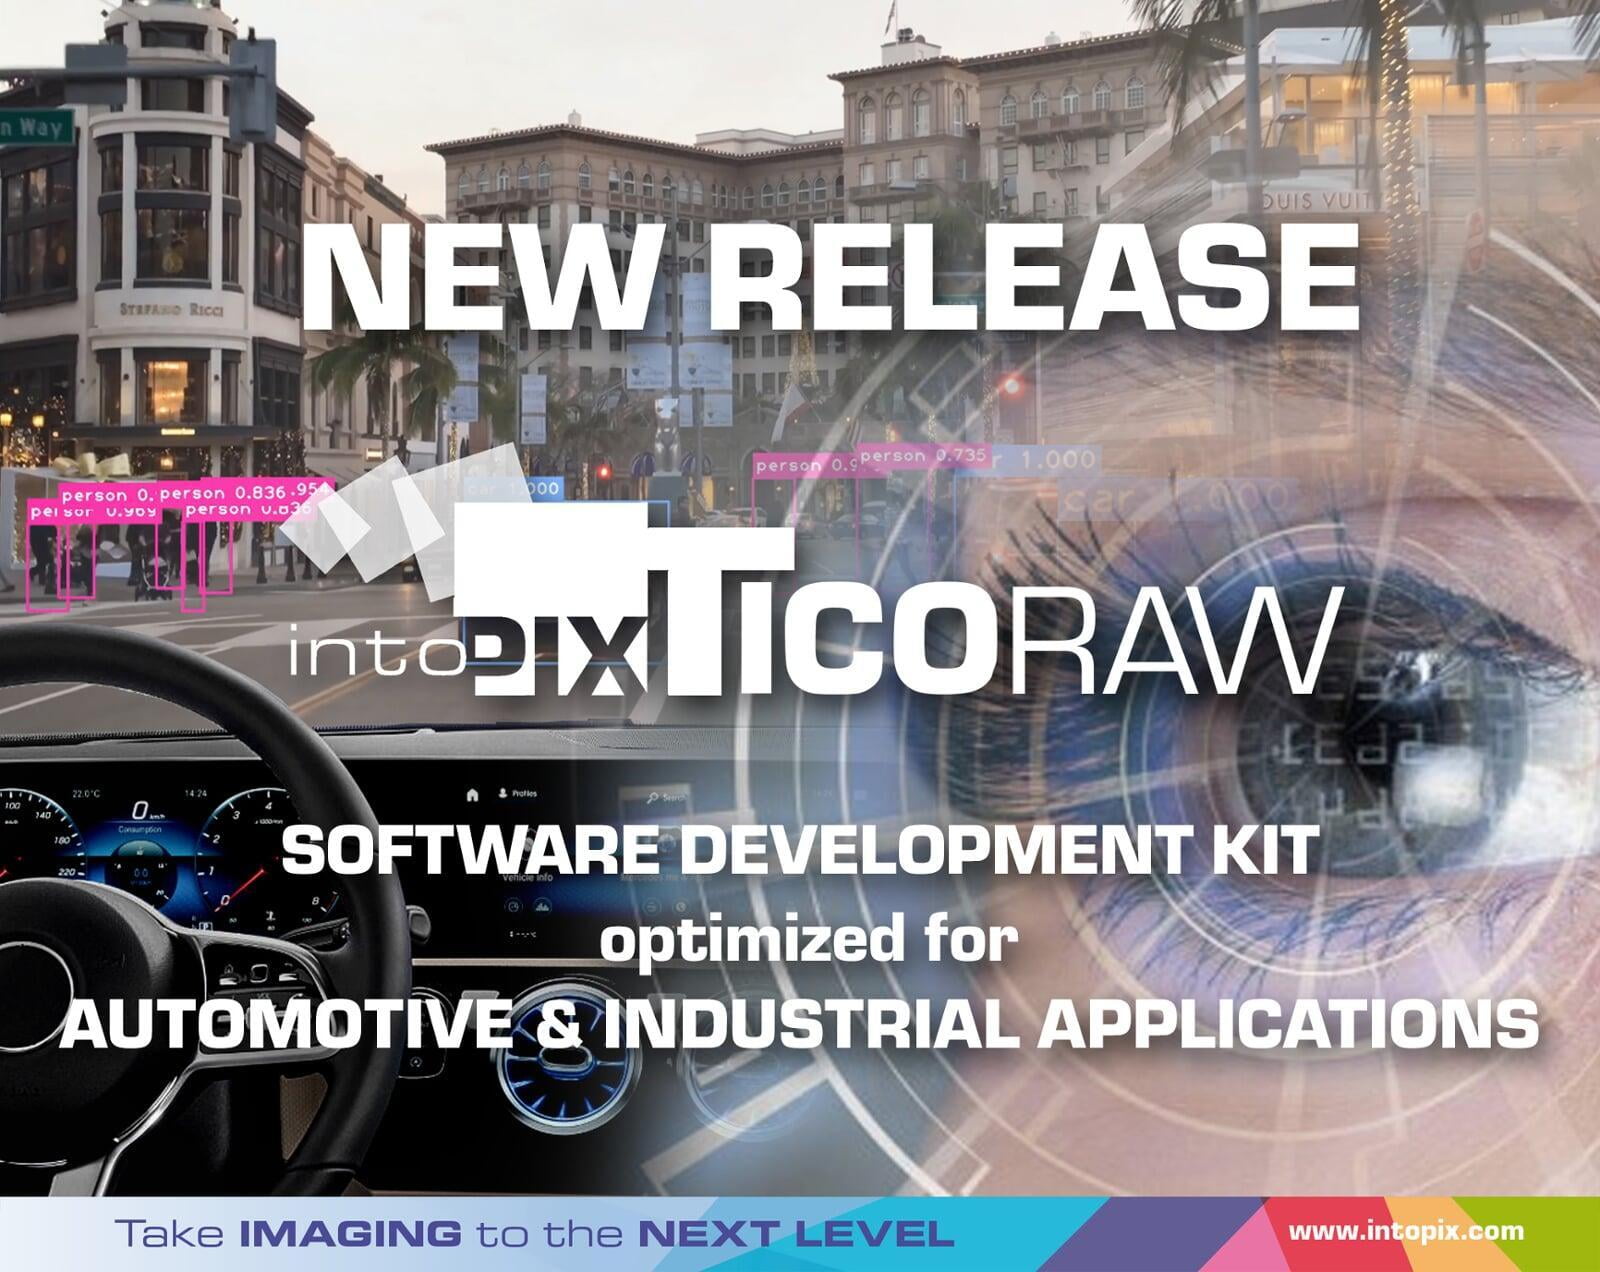 intoPIX extends the FastTicoRAW SDK capabilities with lossless RAW coding for measurement and analysis